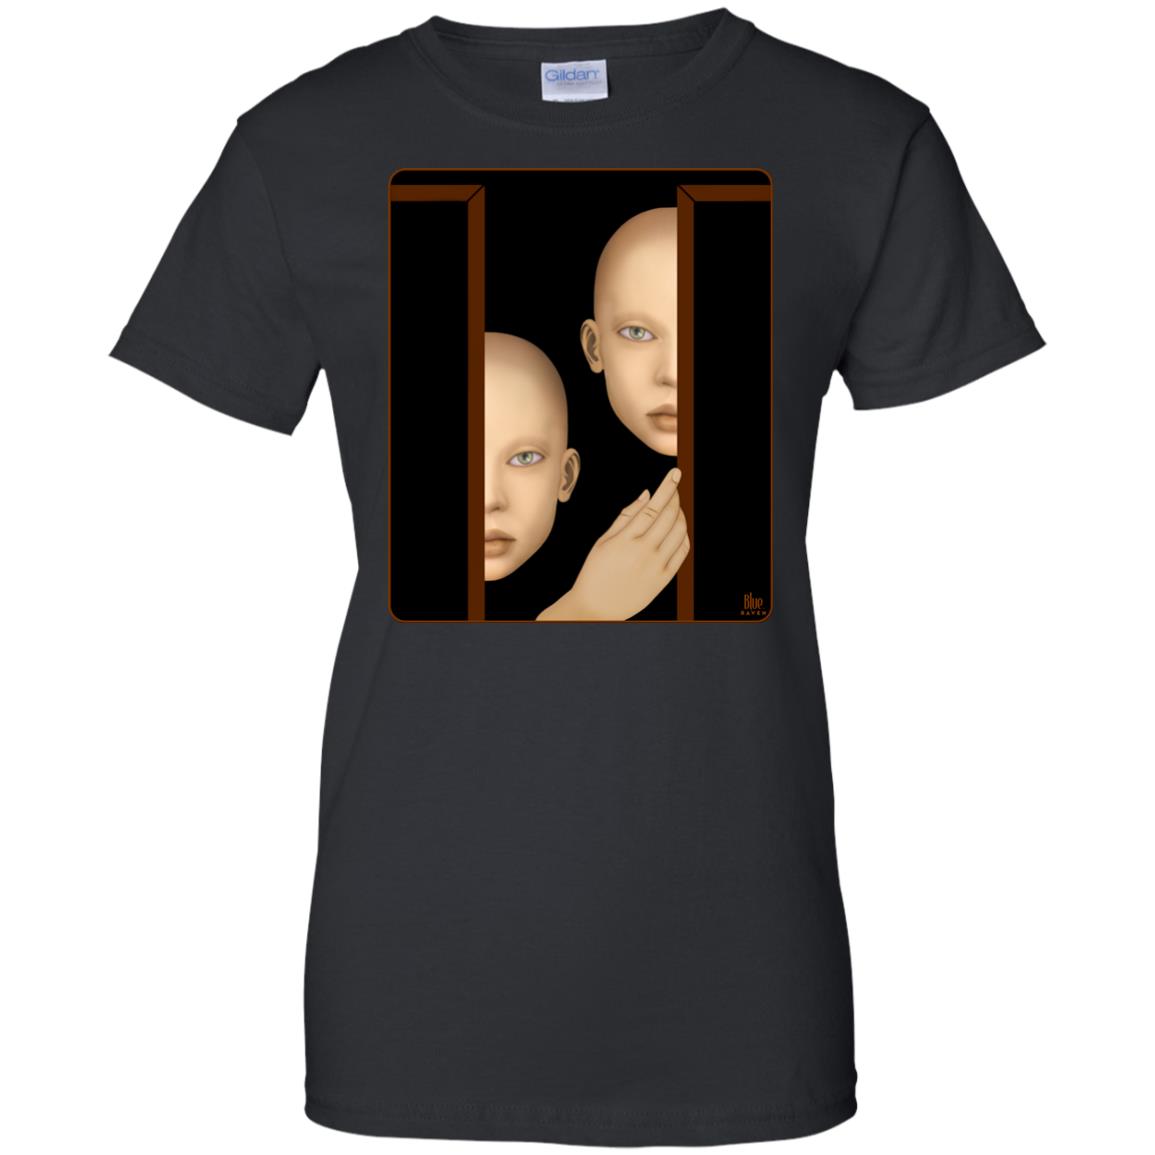 THE WATCHERS - Women's Relaxed Fit T-Shirt